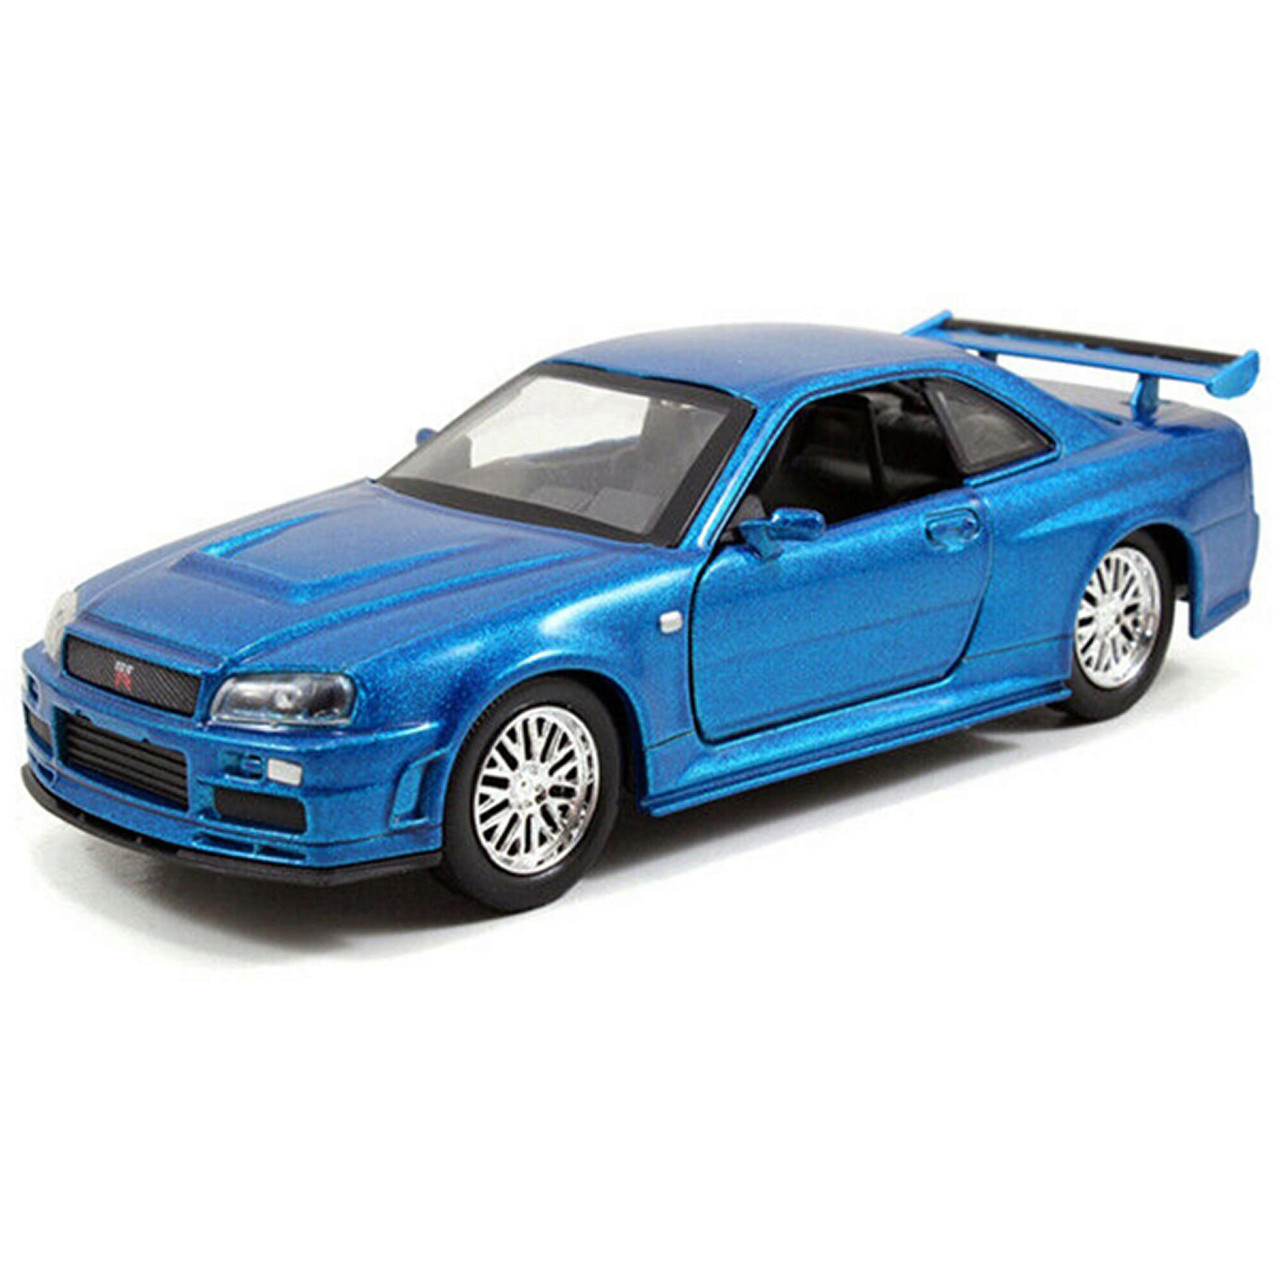 Fast and Furious Brian's Nissan Skyline GT-R R34 1:24 Scale Die-Cast Metal  Vehicle